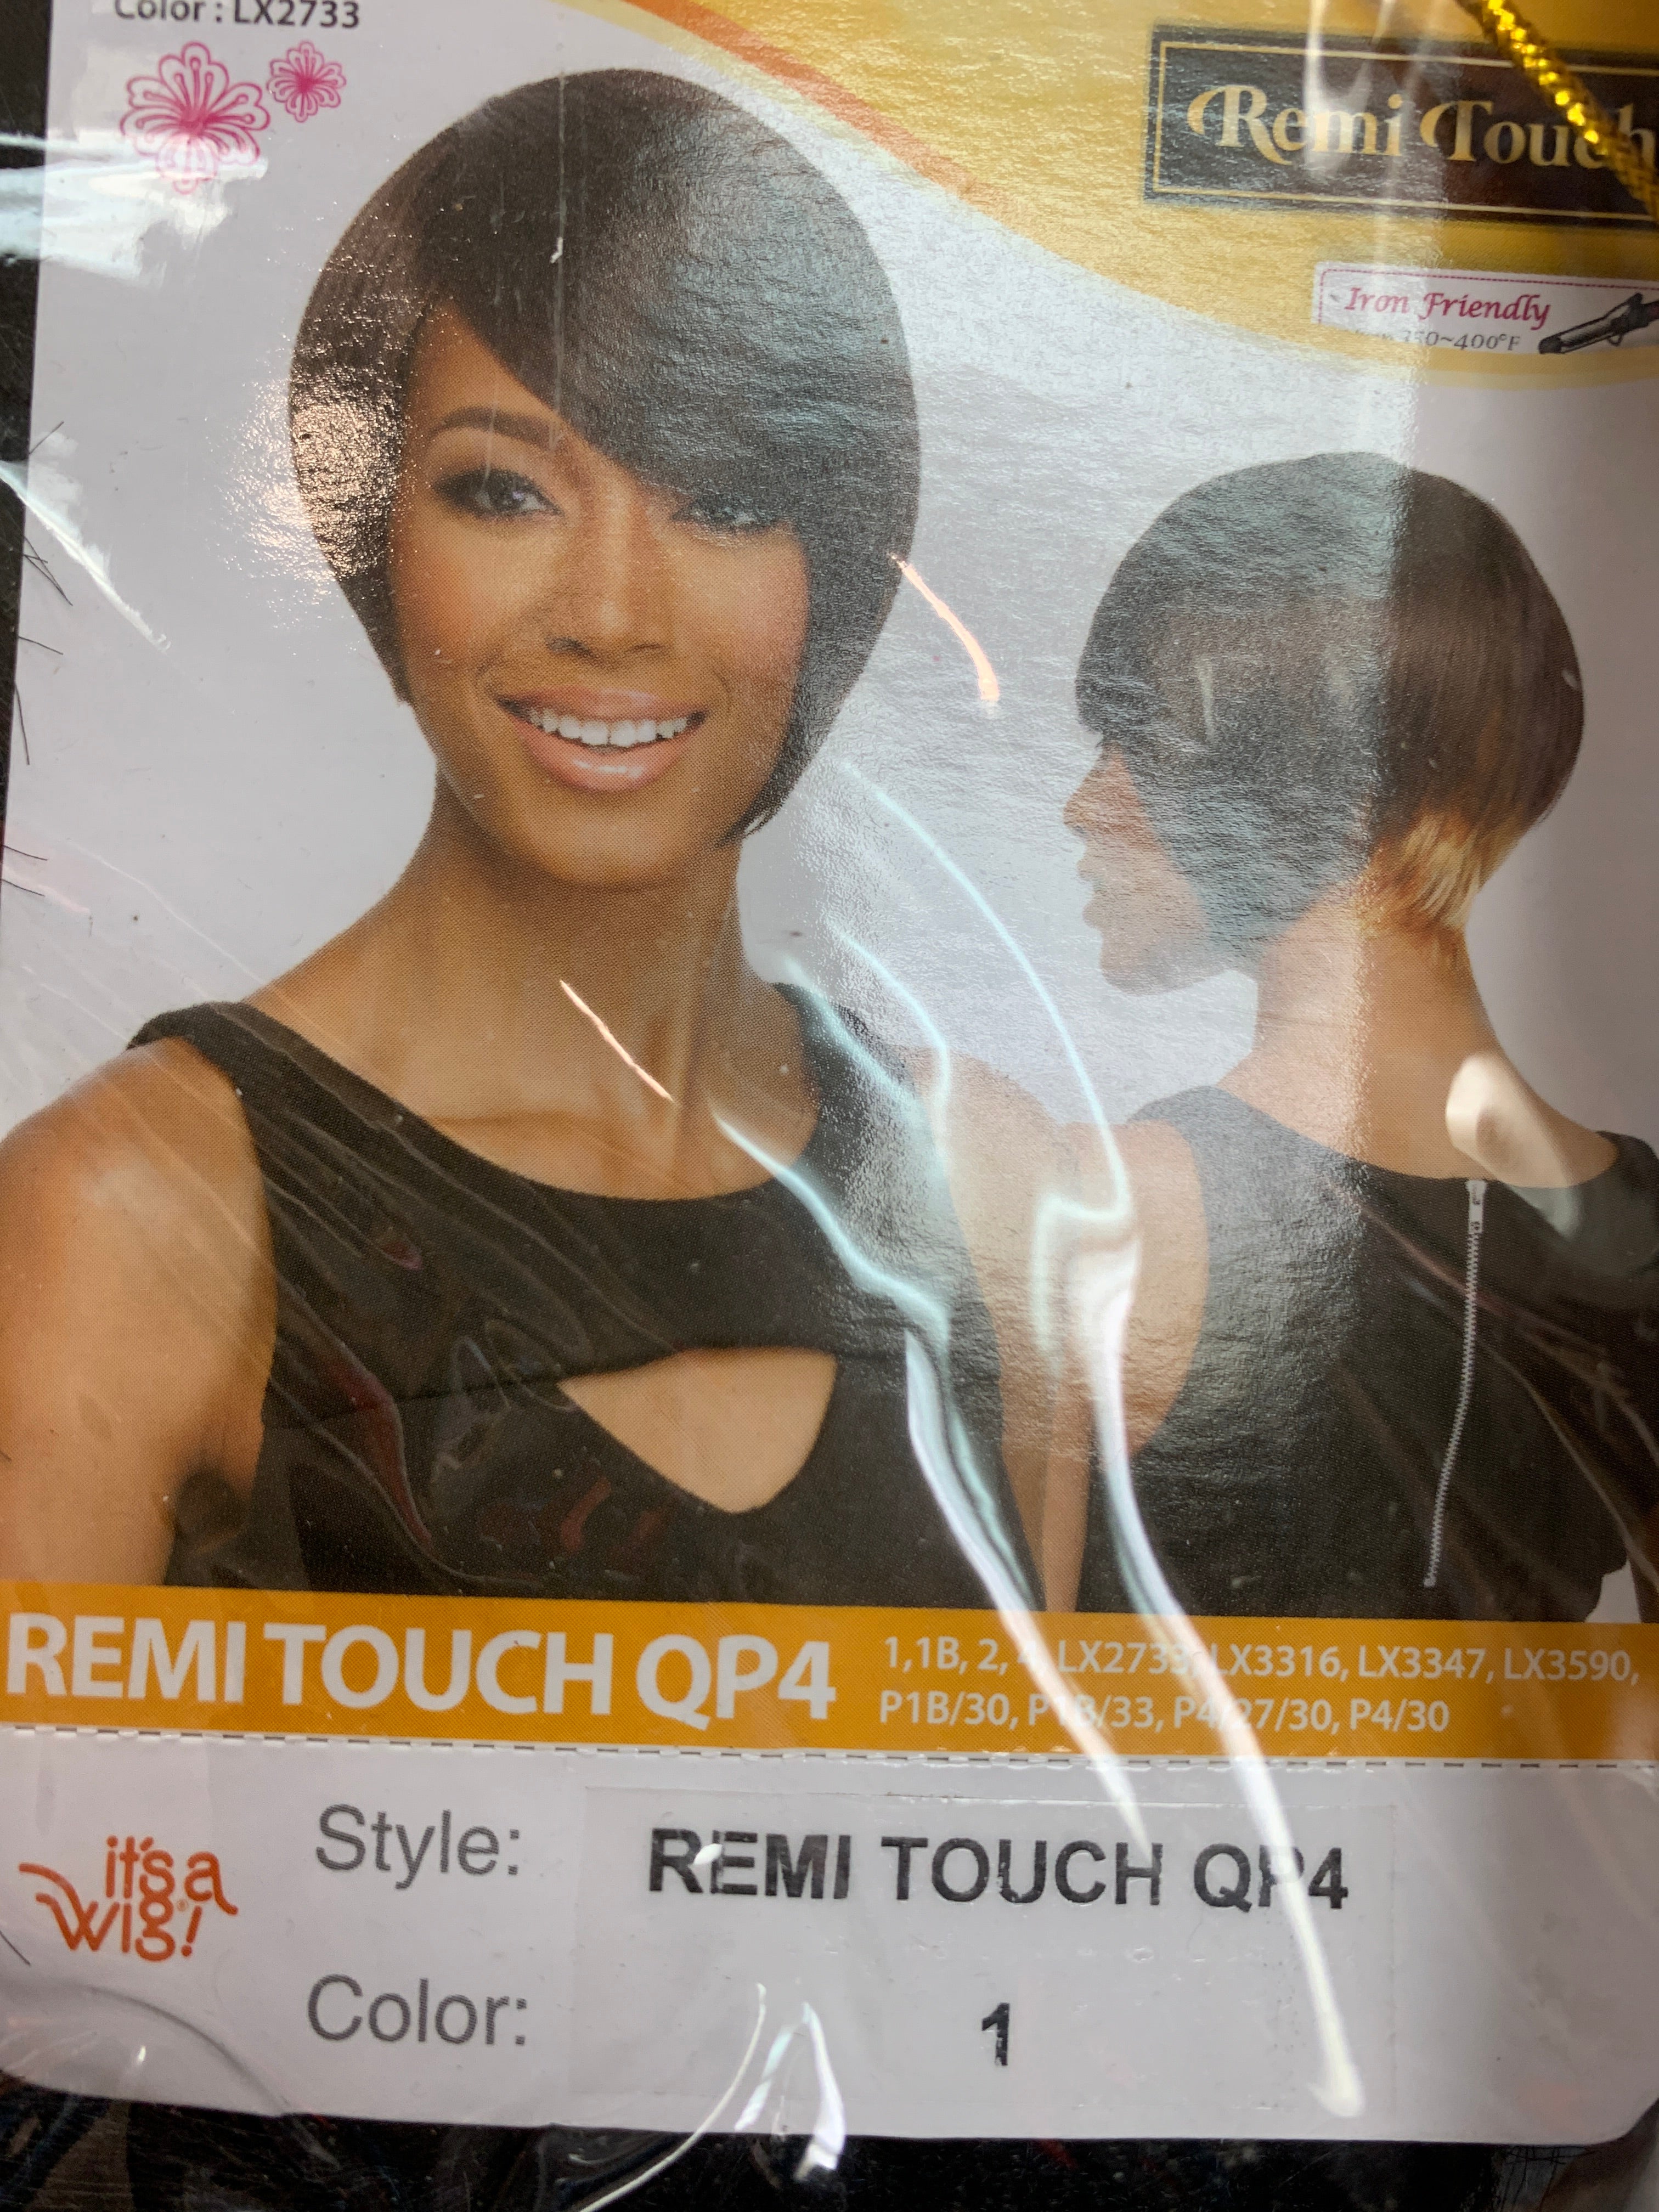 It’s a wig Remi touch op4